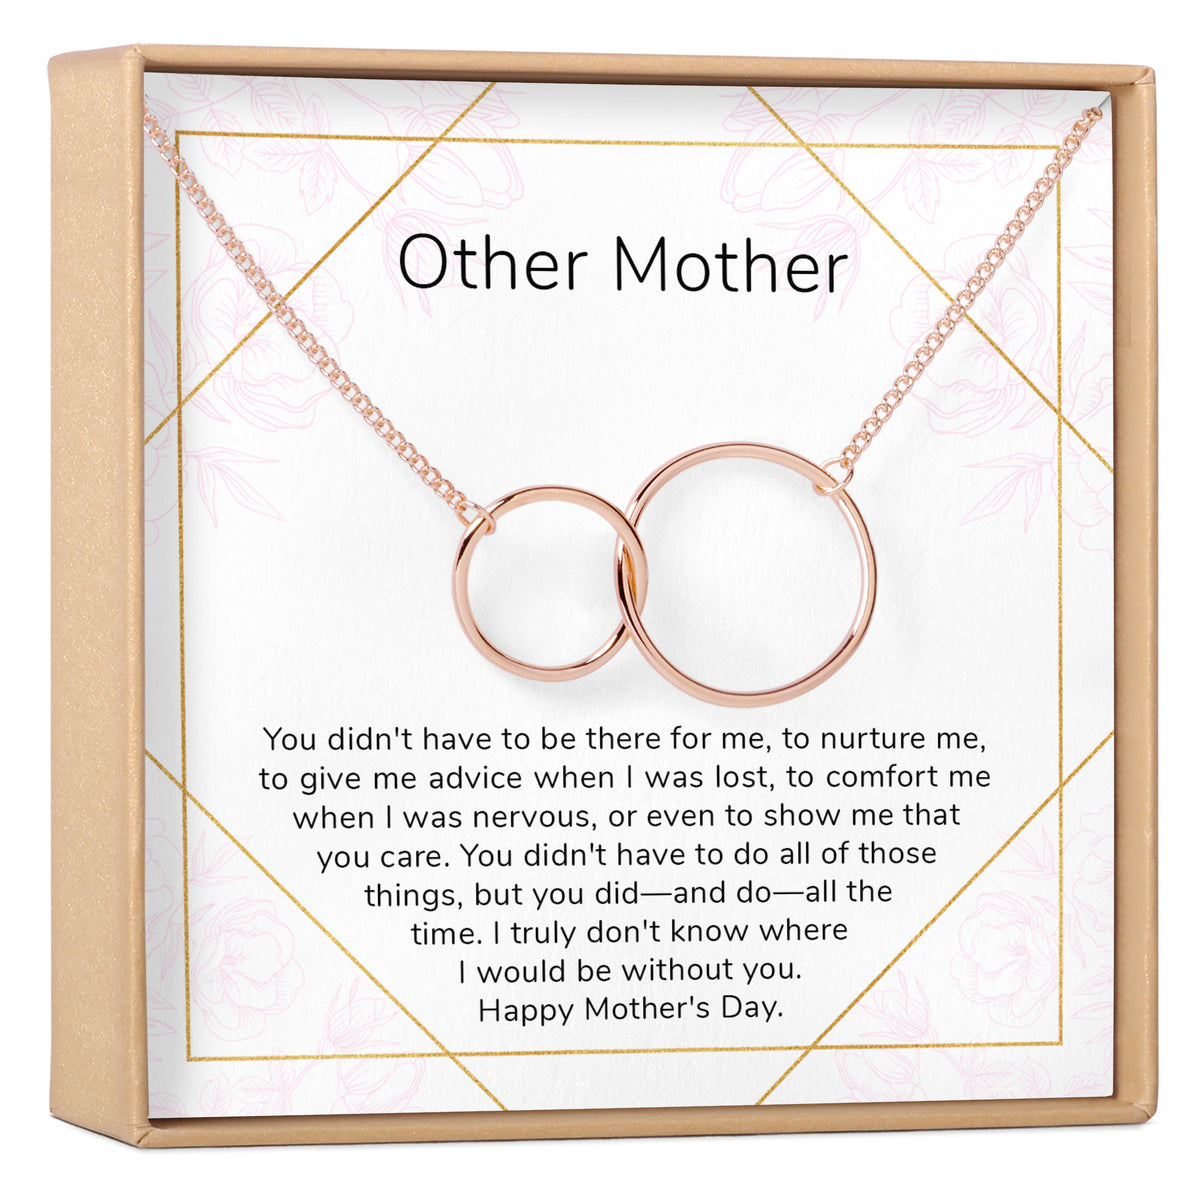 Other Mother Necklace